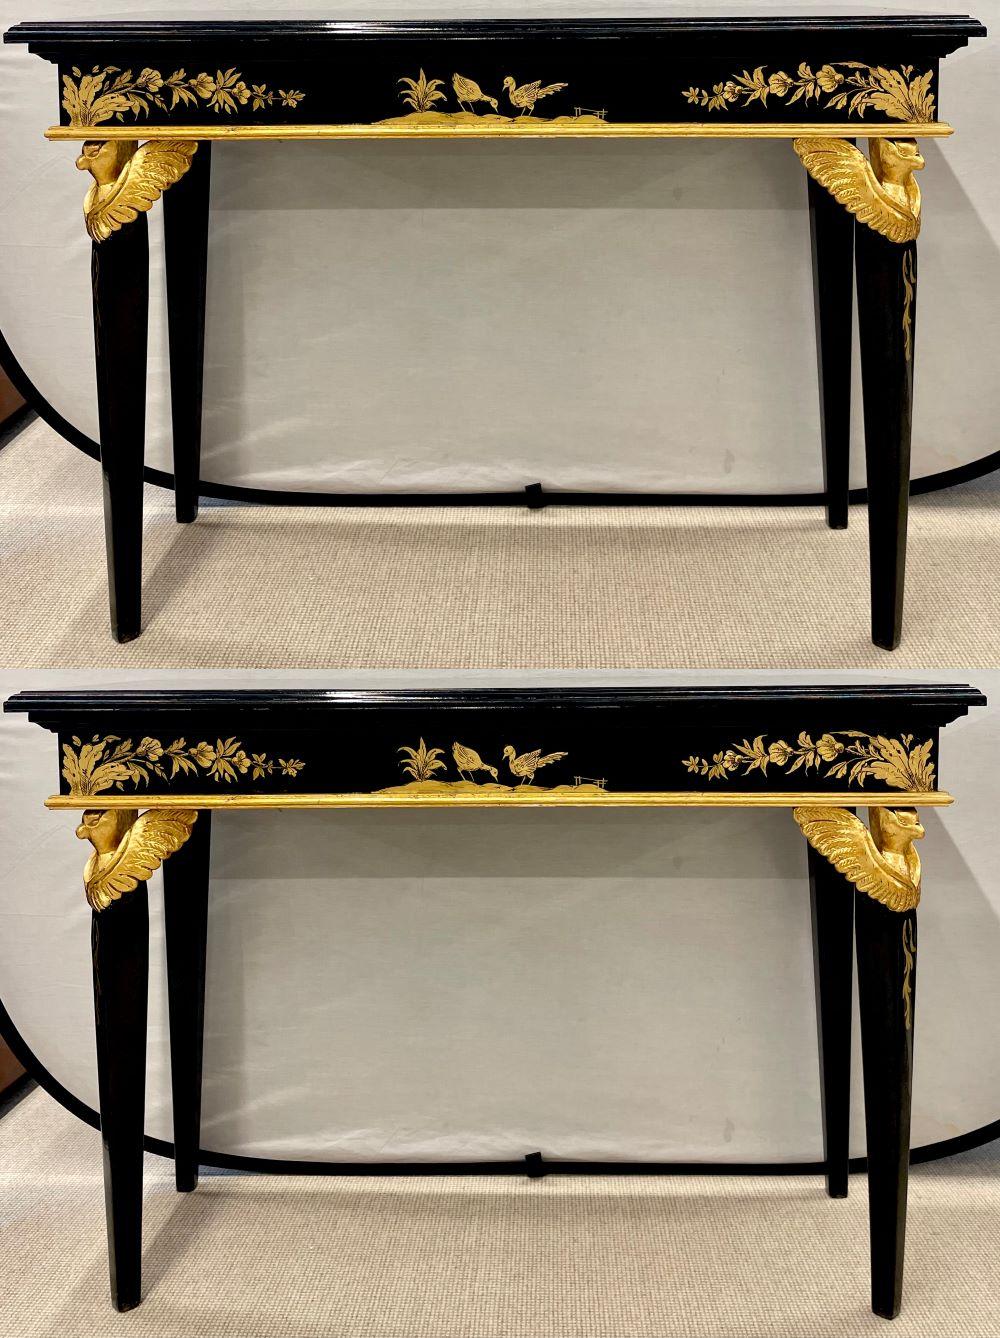 Neoclassical Pair of Hollywood Regency Style Console Sofa Tables Ebony and Gilt Decorated